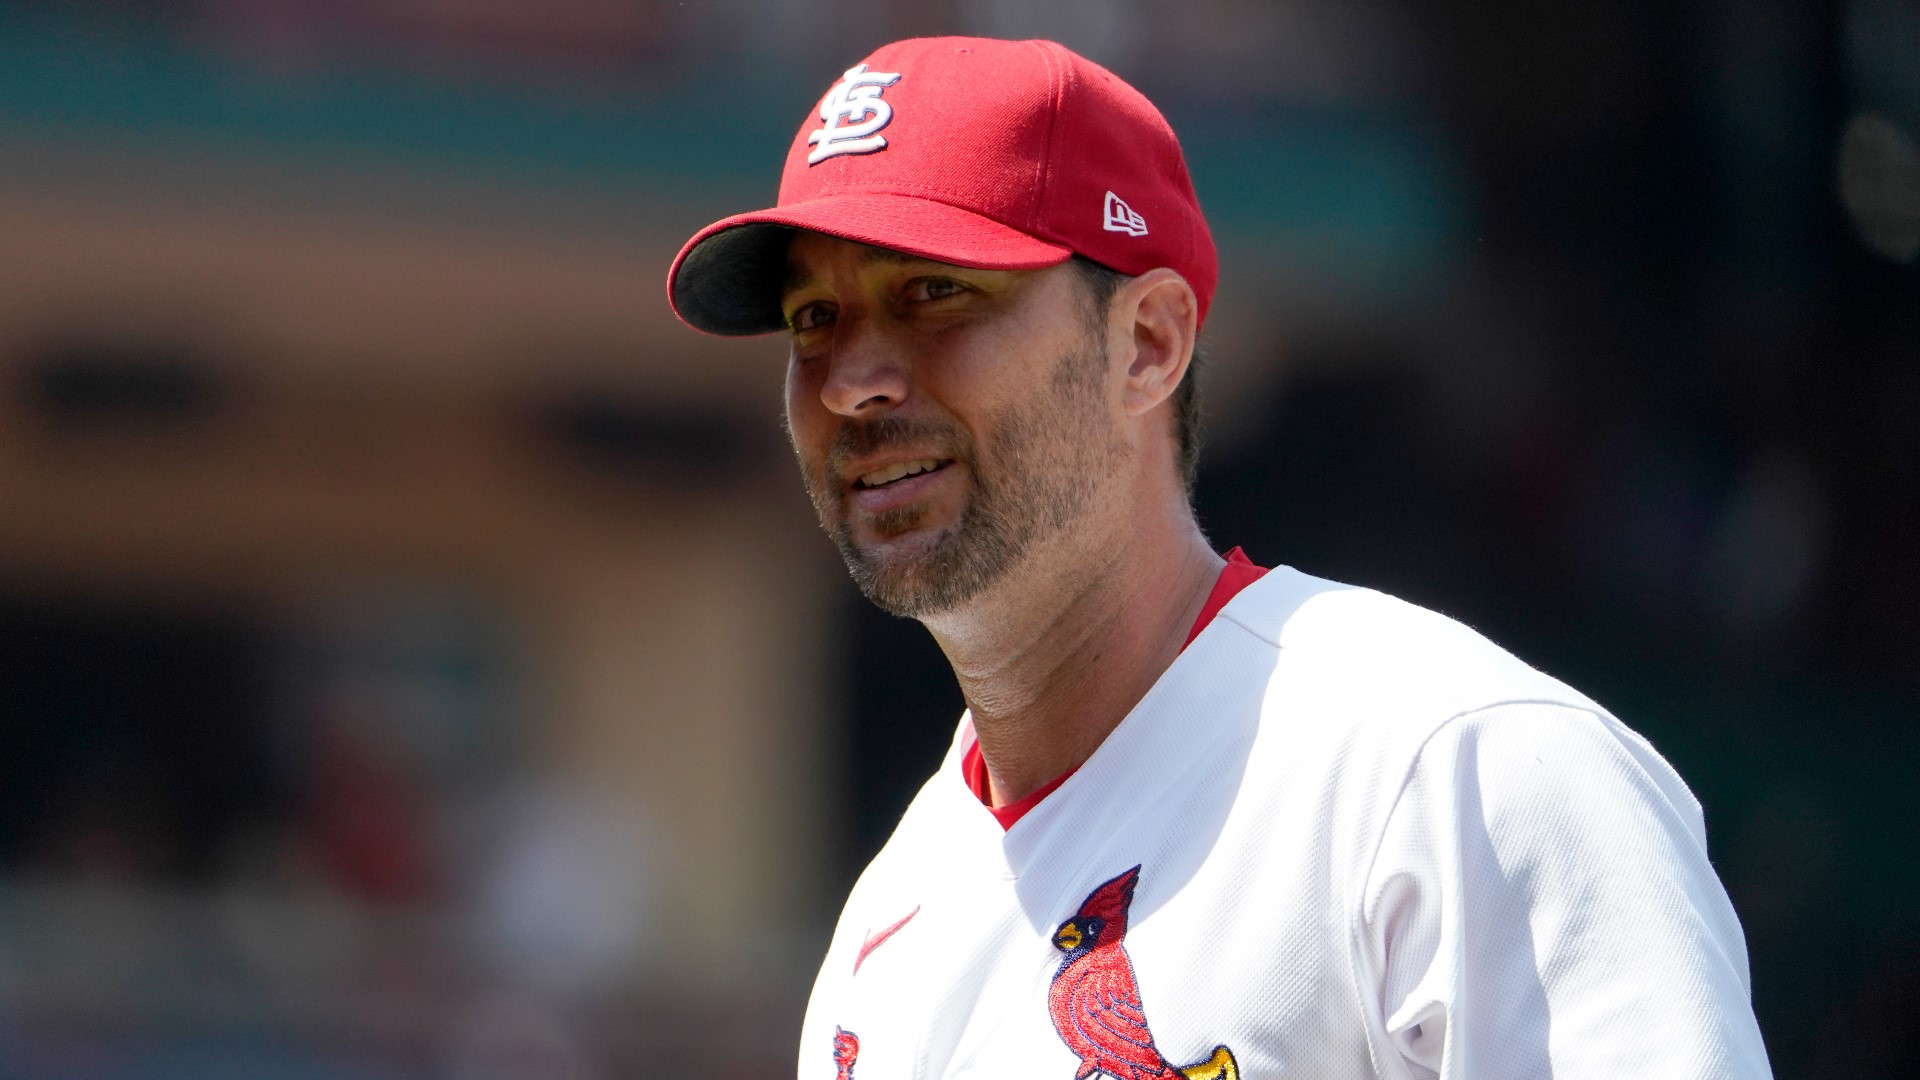 Wainwright will be back for one final season in 2023.